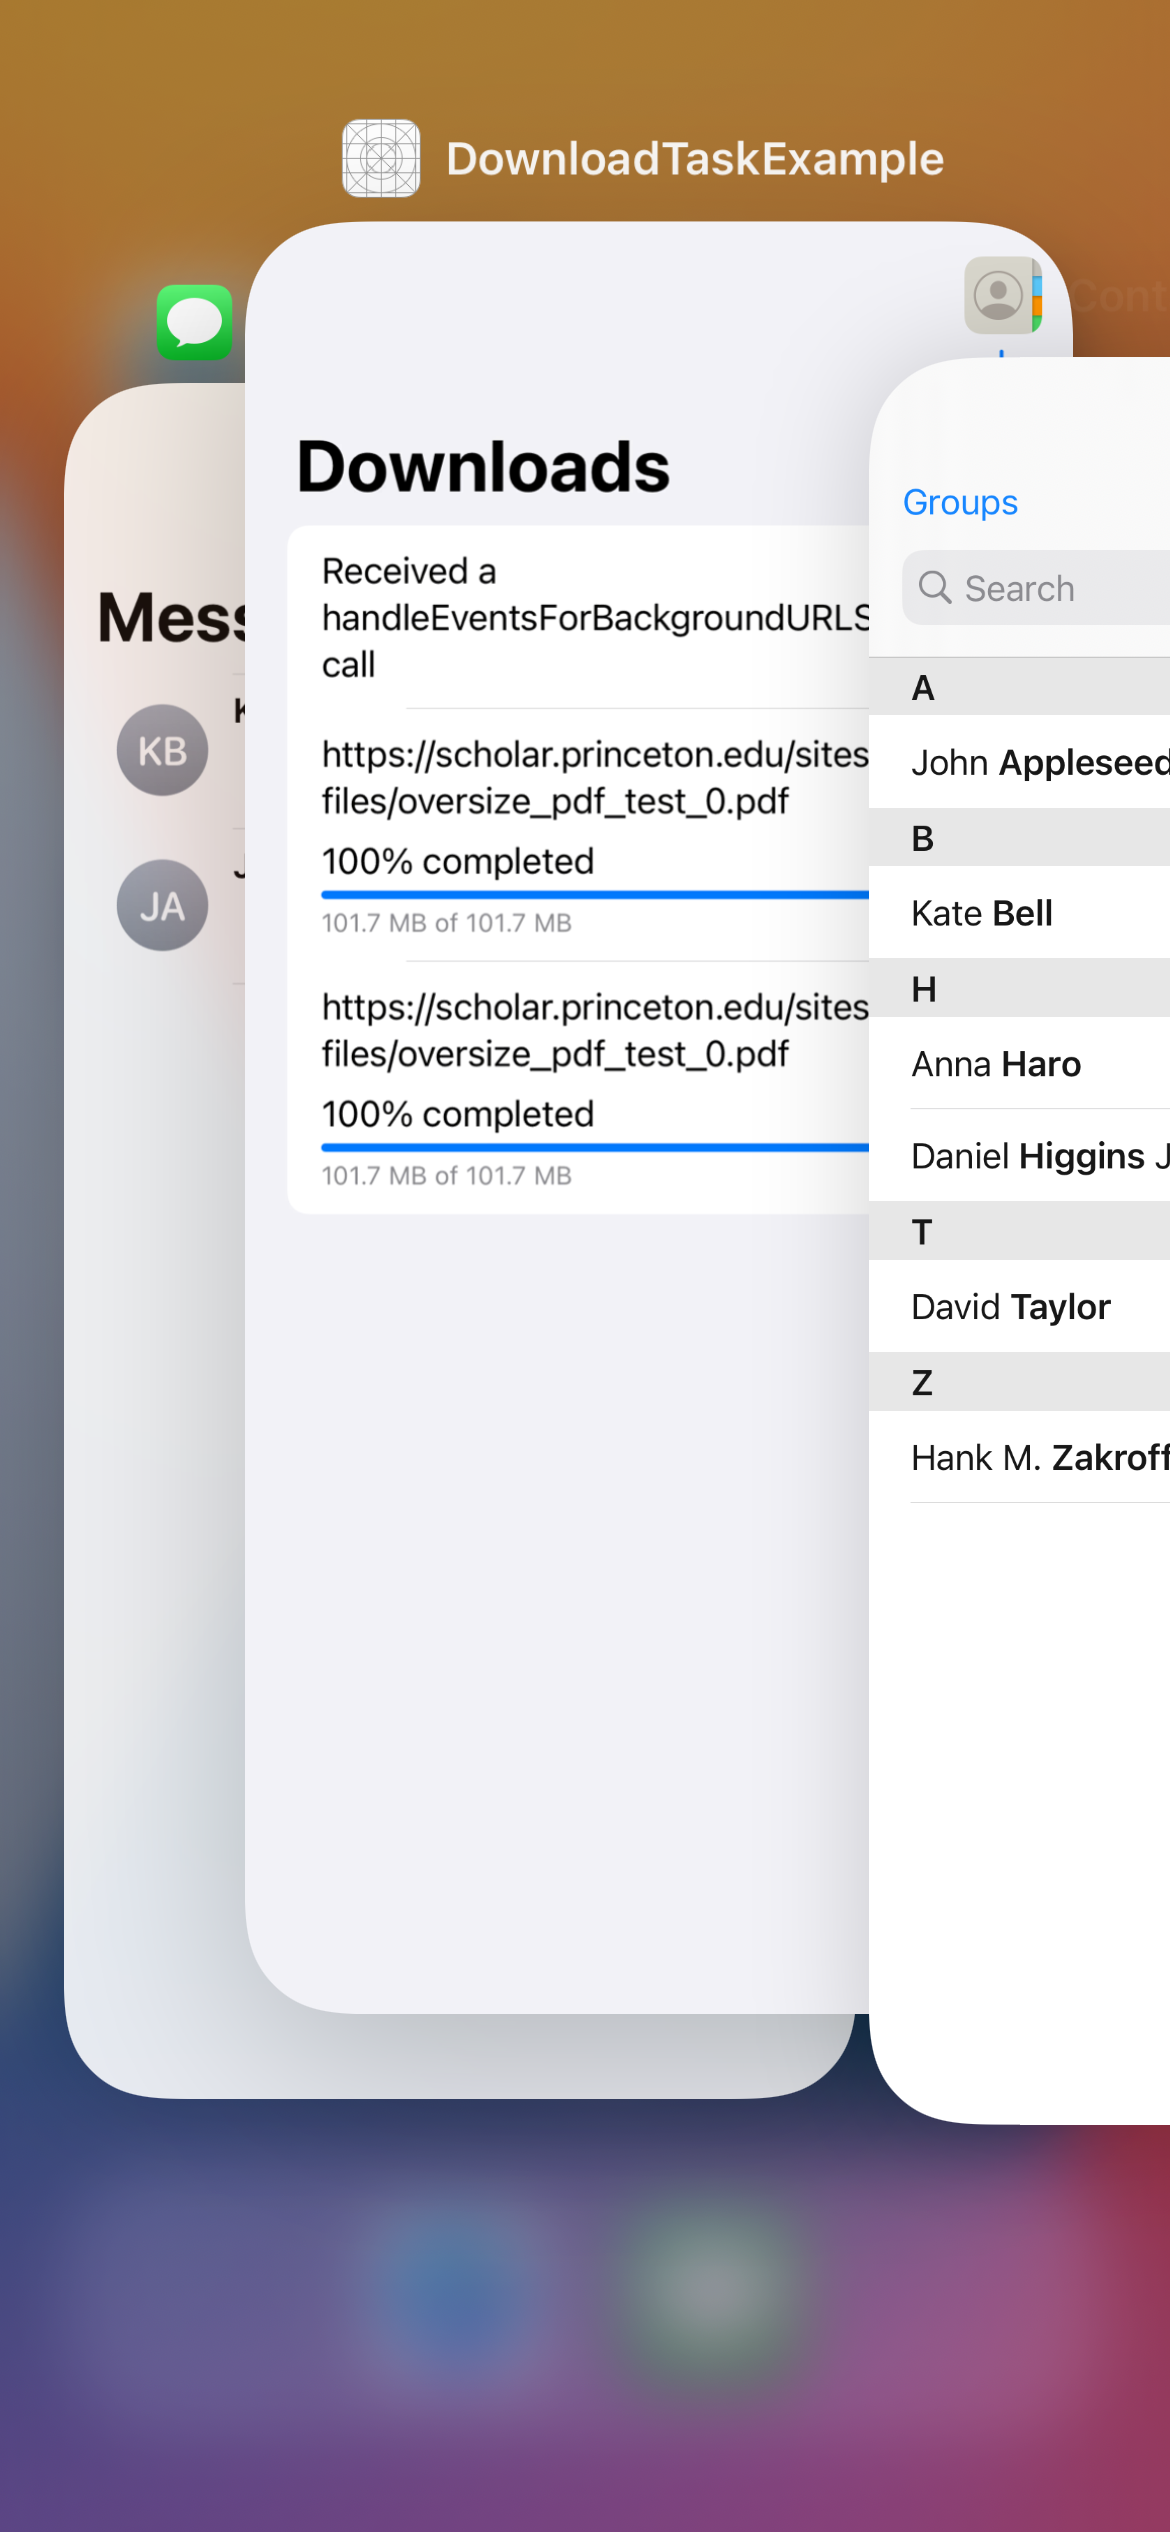 Swiping in the application switcher cancels all background tasks